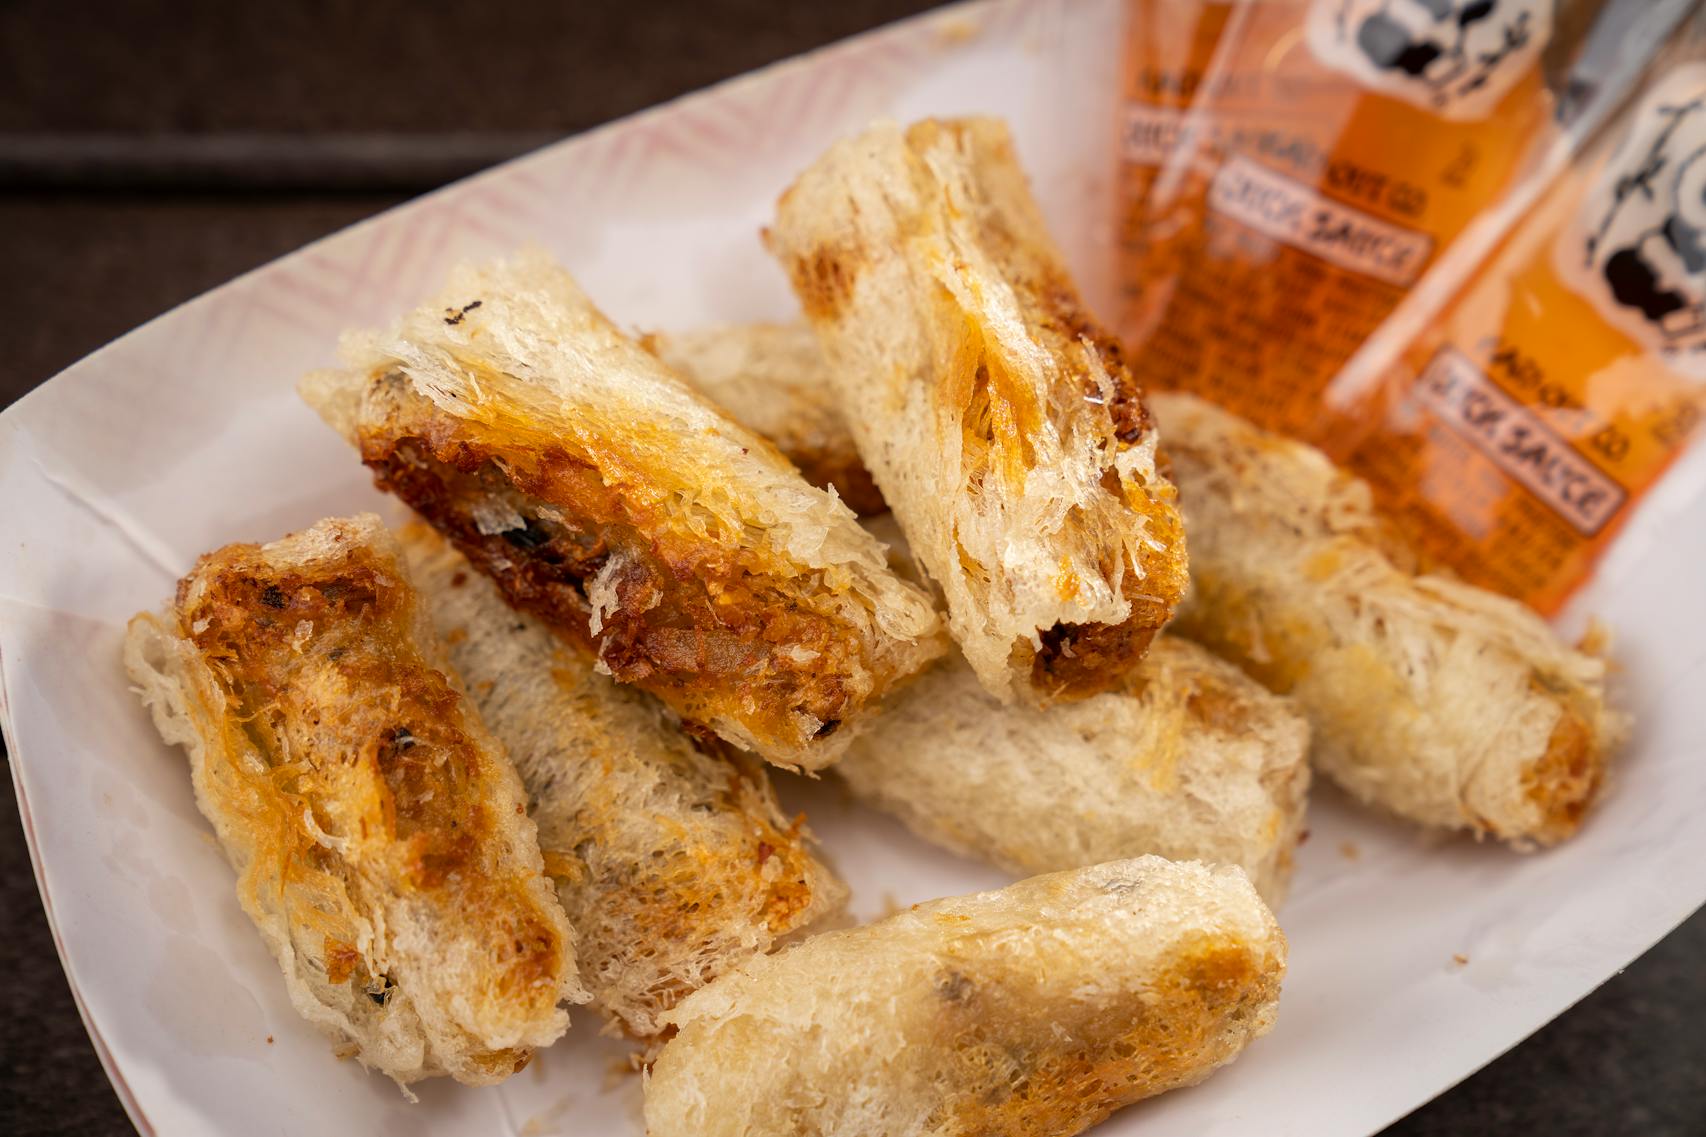 MinneVegetarian Egg Rolls from Que Viet Concessions. The new foods of the 2023 Minnesota State Fair photographed on the first day of the fair in Falcon Heights, Minn. on Tuesday, Aug. 8, 2023. ] LEILA NAVIDI • leila.navidi@startribune.com